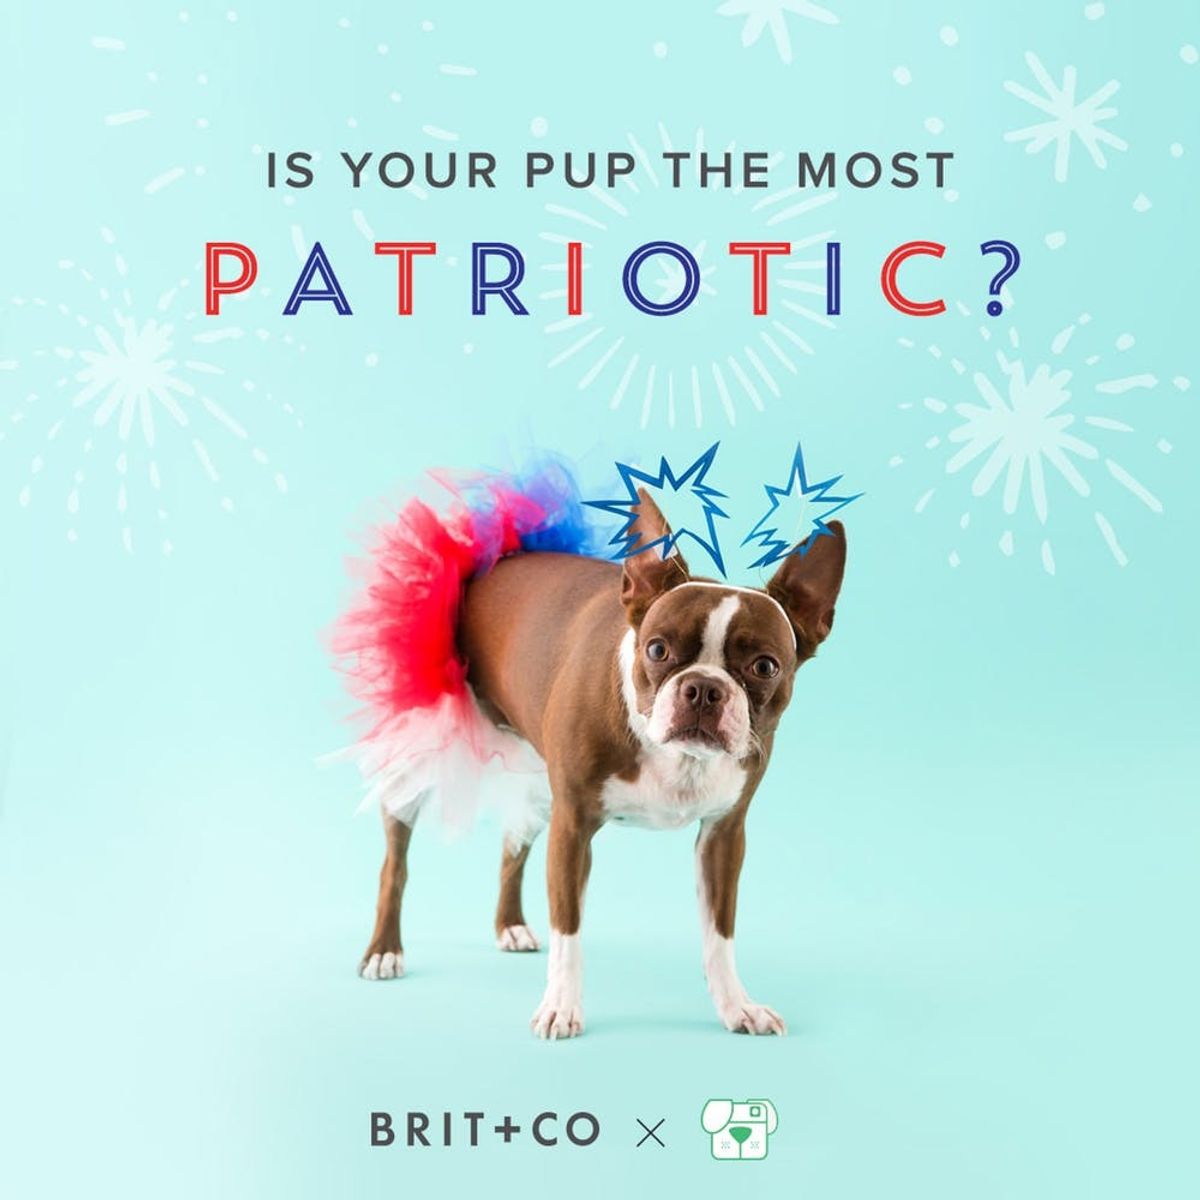 Show Us Your Patriotic Pups to Be Part of Our Snapchat 4th of July!